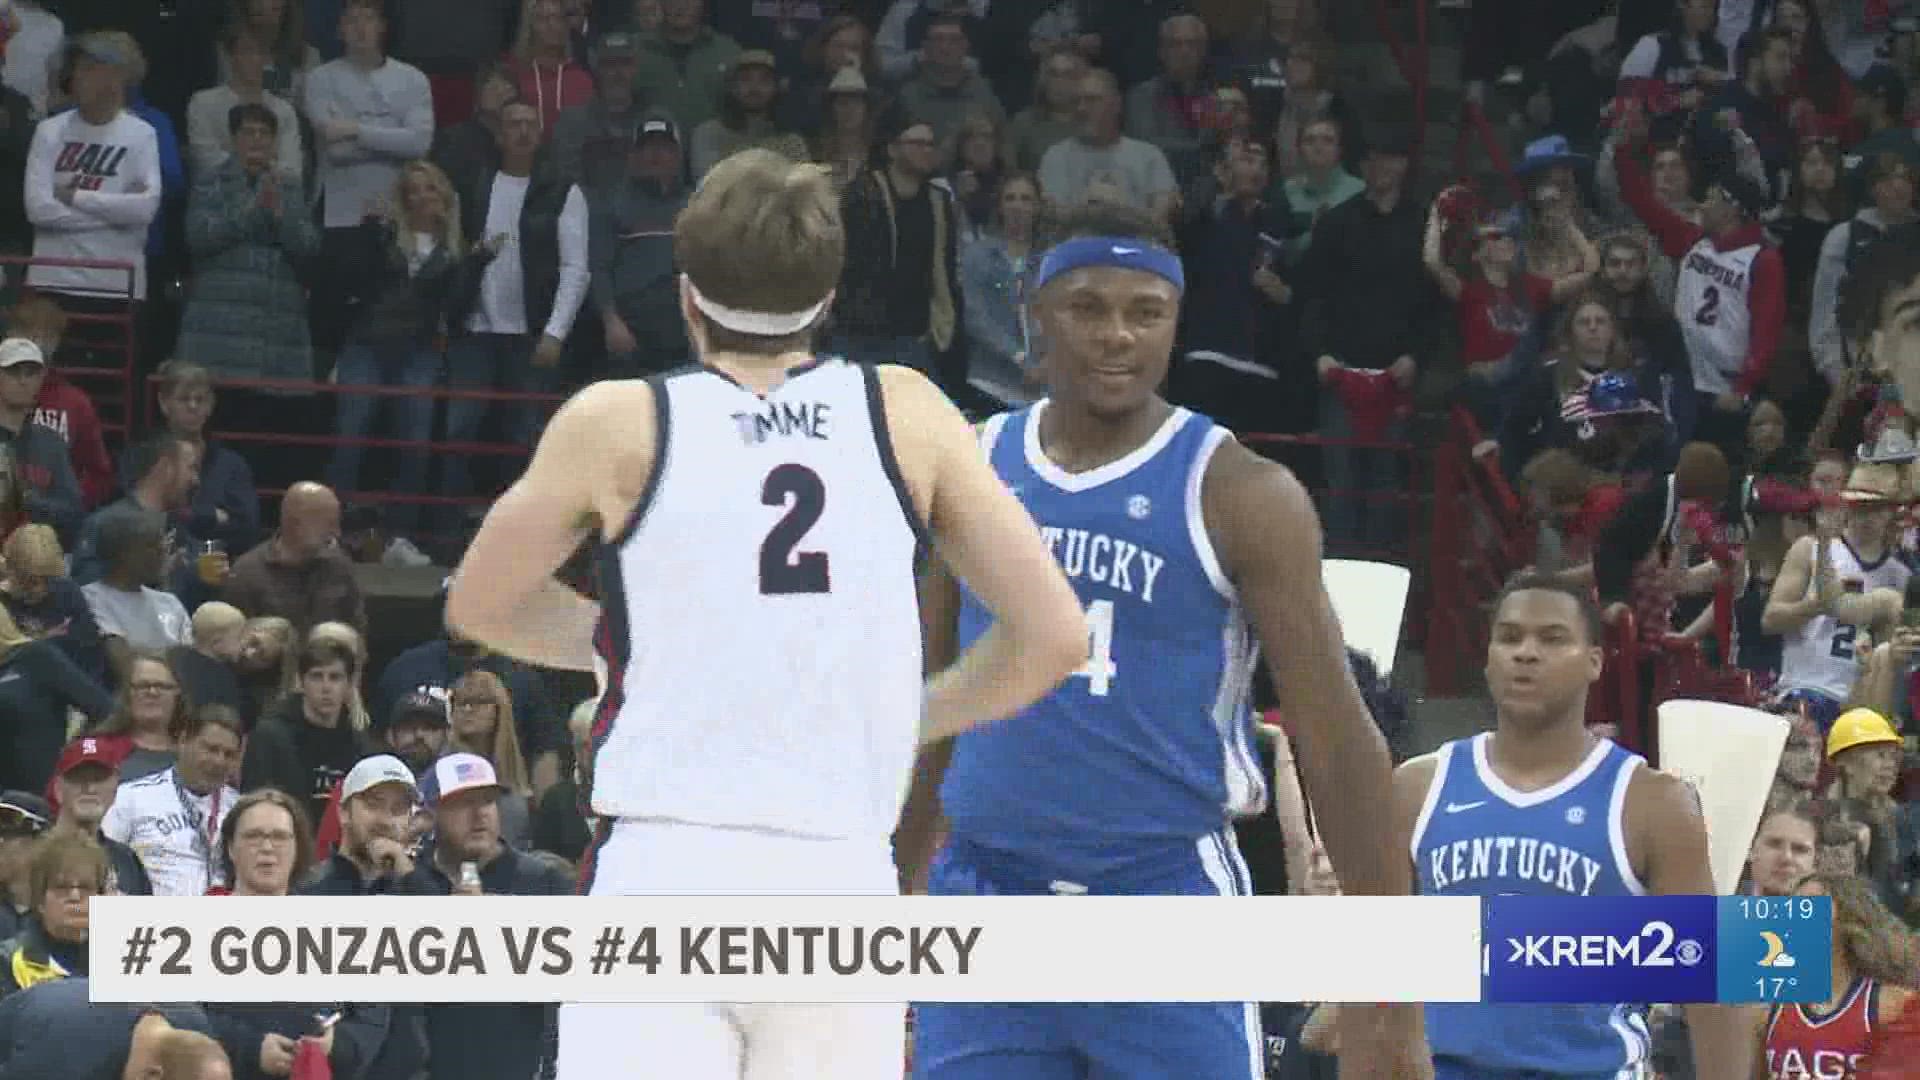 Rasir Bolton scored 24 points, Drew Timme added 22 points, and No. 2 Gonzaga beat cold-shooting No. 4 Kentucky 88-72.